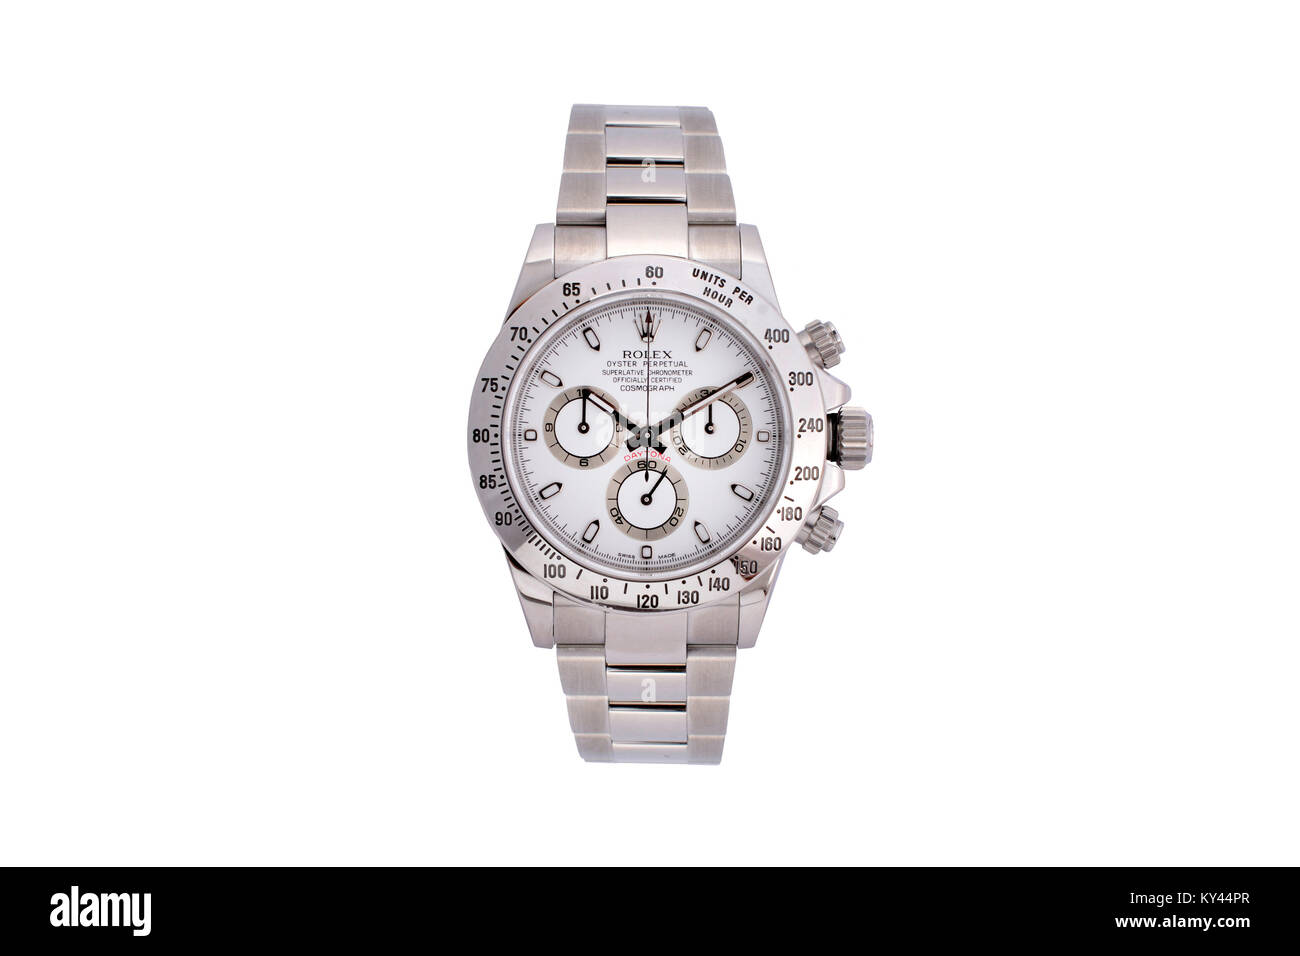 Rolex Daytona Cosmograph stainless steel man's watch with white face Stock Photo